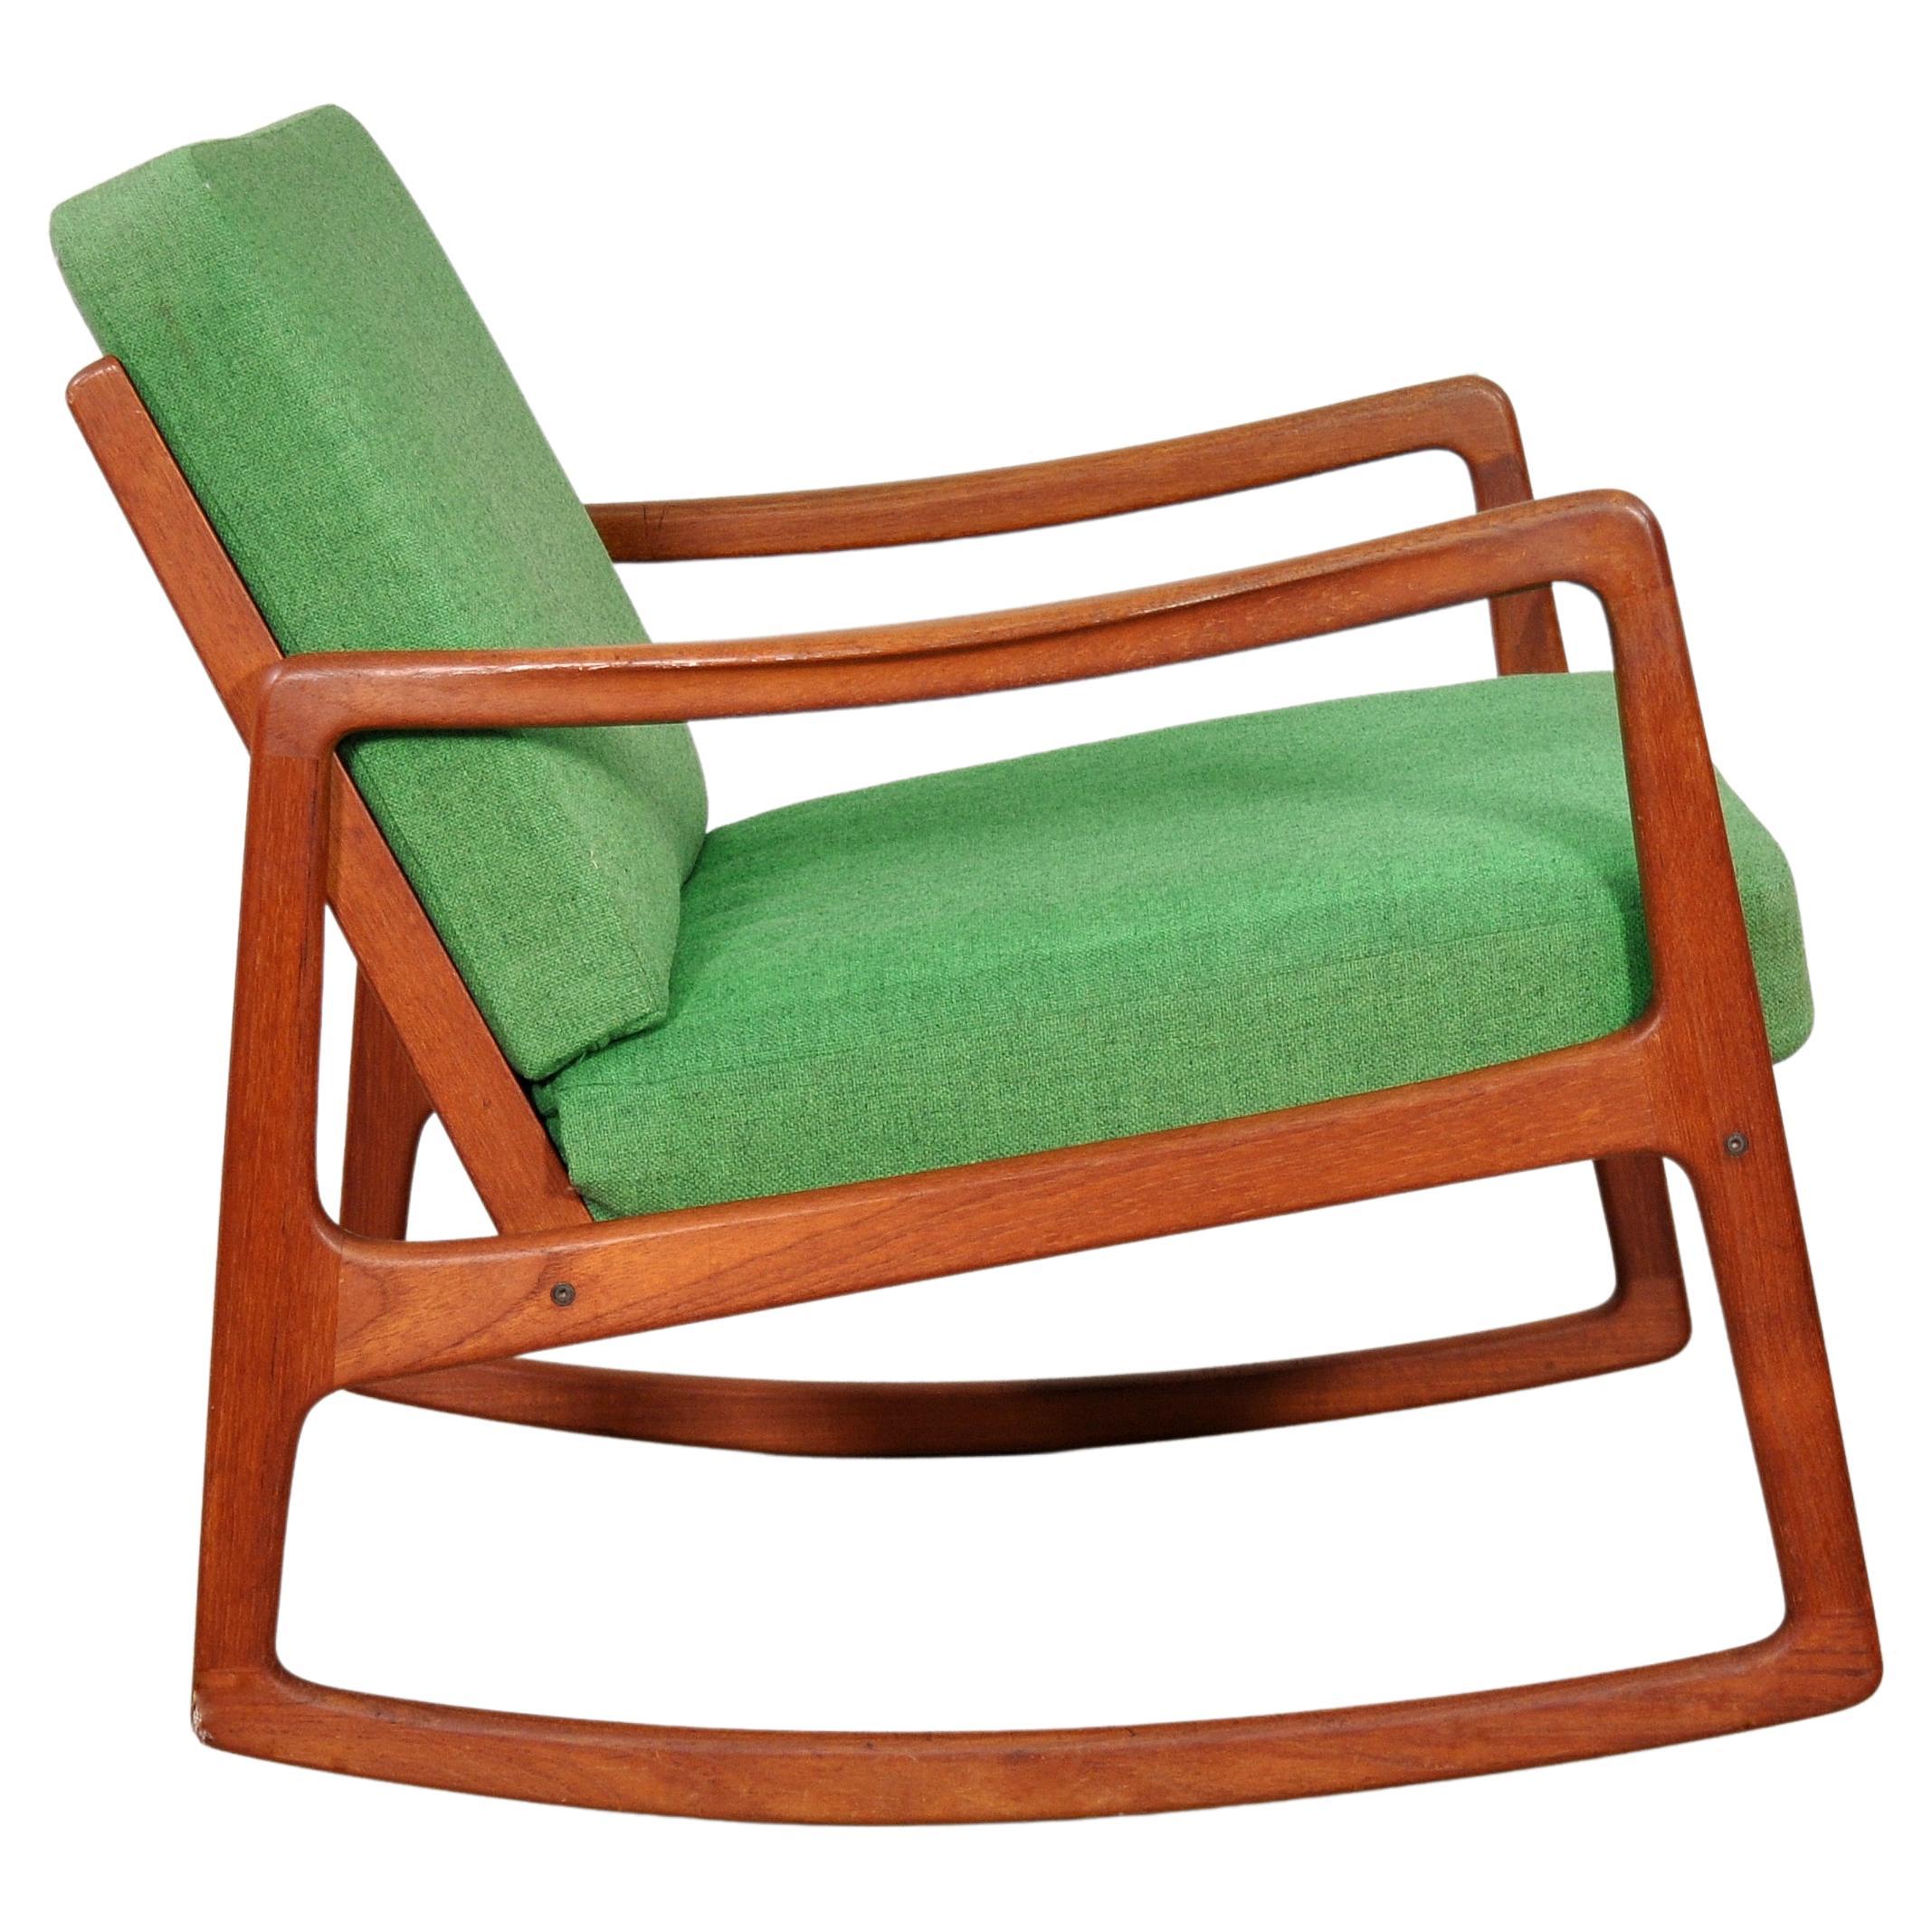 Experience the elegance of this all original vintage FD 120 rocking lounge chair, boasting a sleek and minimalist design. Skillfully sculpted from teak wood, the rocker features the original oil-rubbed finish with beautiful, rich patina, and the